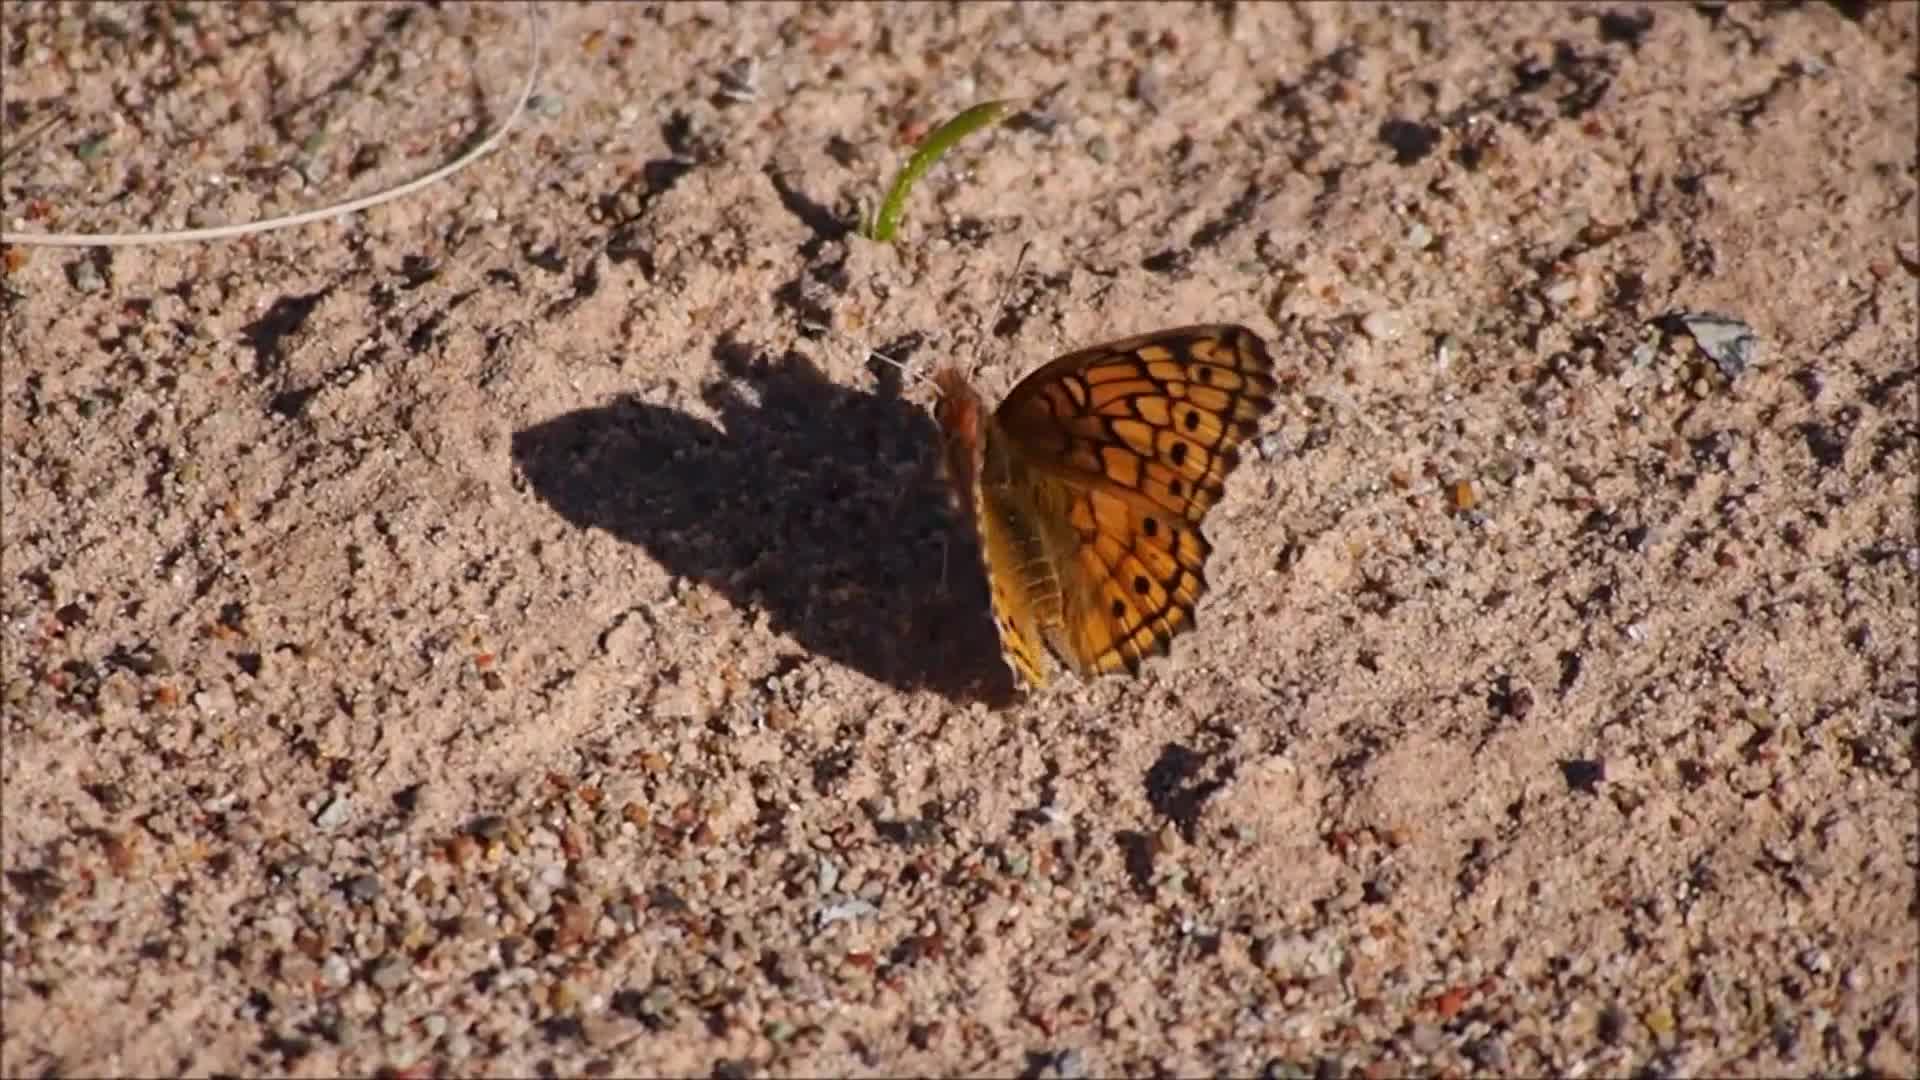 Variegated Butterfly